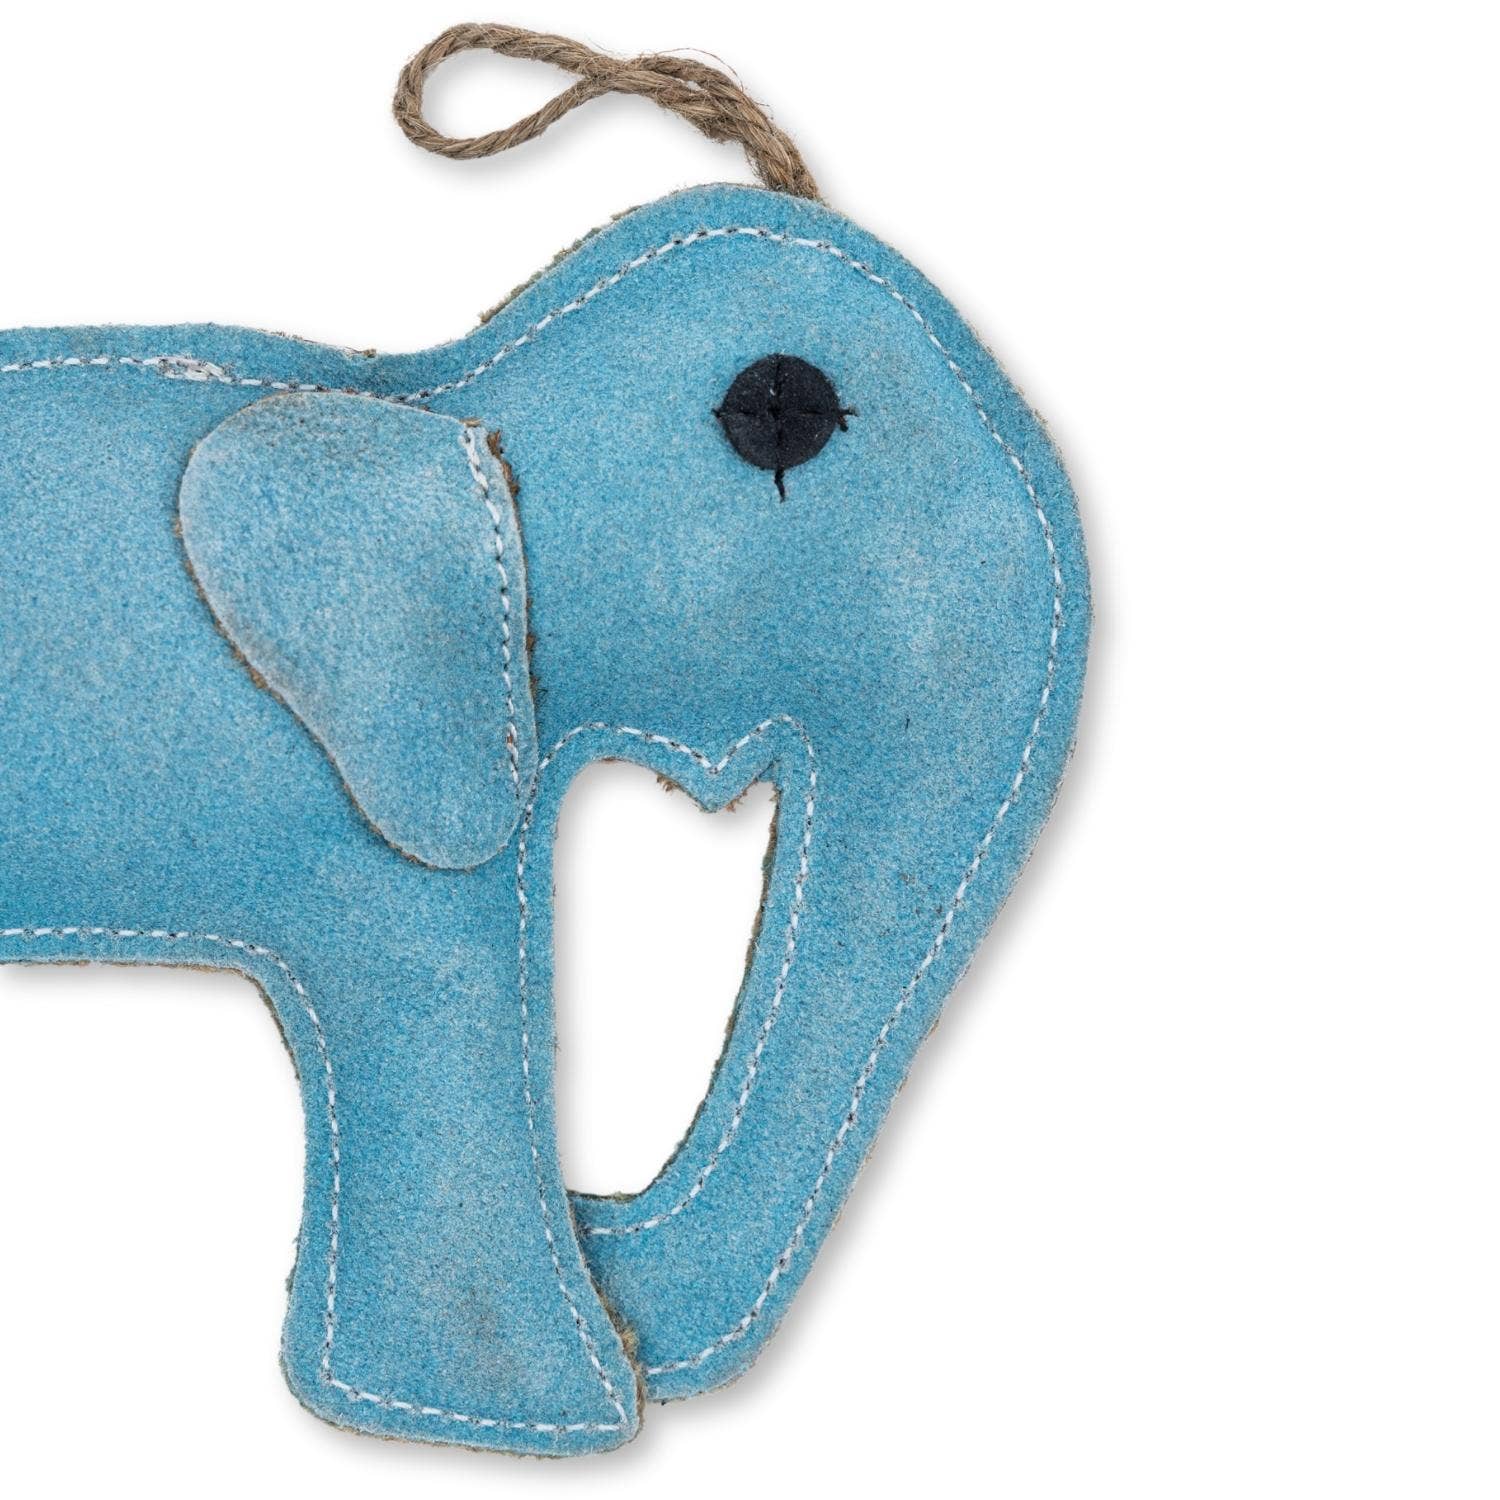 Jojo Modern Pets - Artisan-Crafted Natural Leather Elephant Dog Chew Toy - Happy Hounds Pet Supply